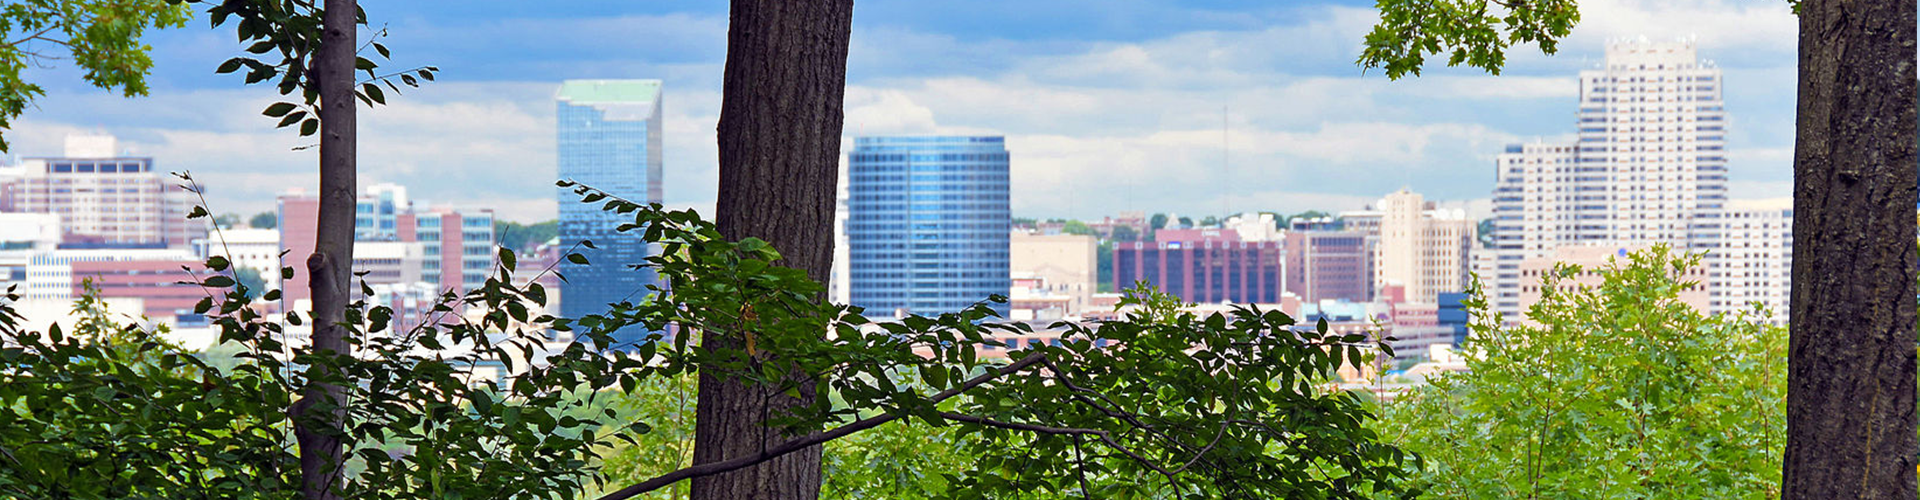 city skyline viewed from between trees and foliage